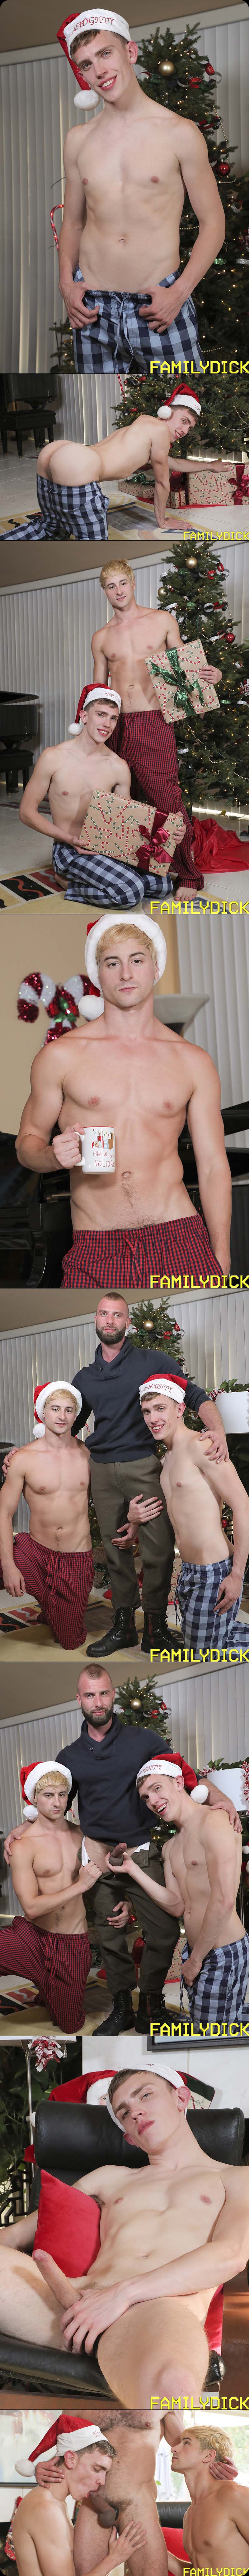 Daddy Lessons, A Very Special Gift From Dad (Donnie Argento, Mason Dean and Taylor Reign) at FamilyDick